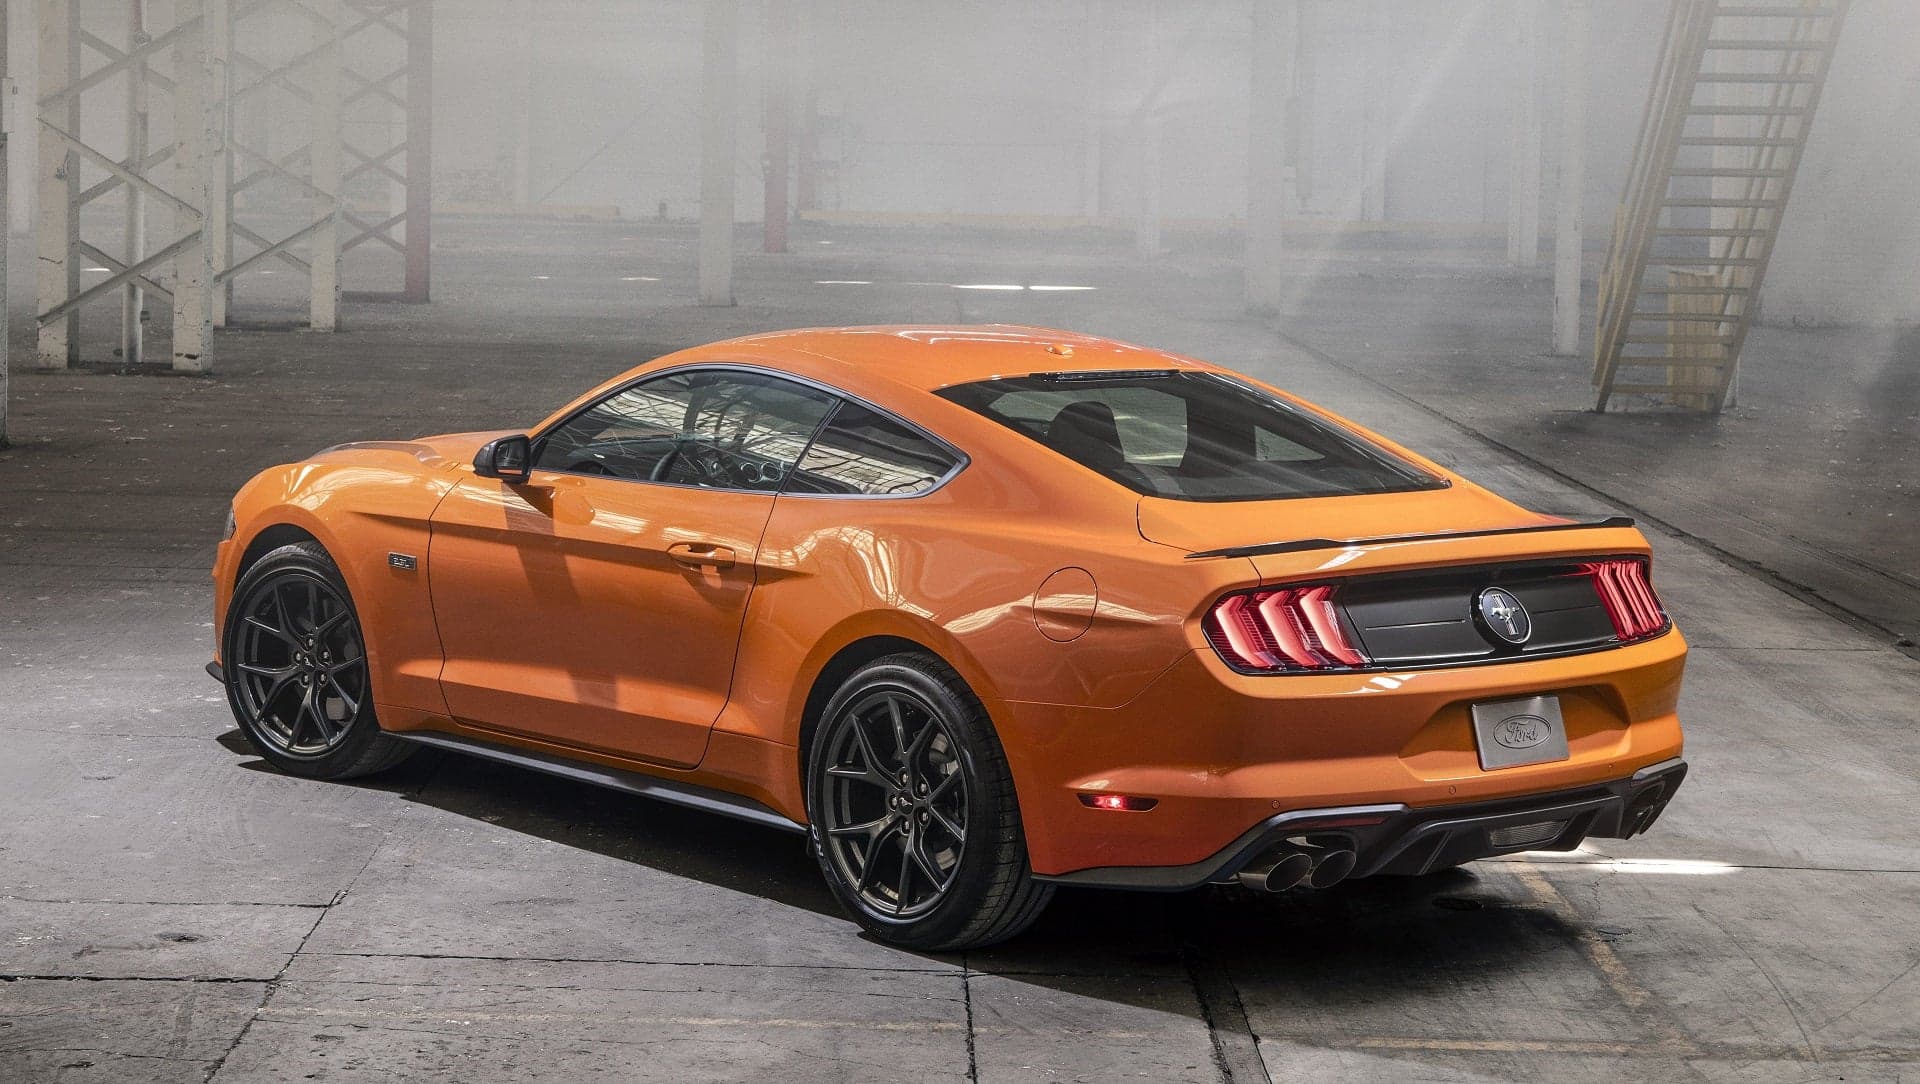 Next-Gen Ford Mustang, Which Drops in 2022, Will Stick Around Until 2030: Report